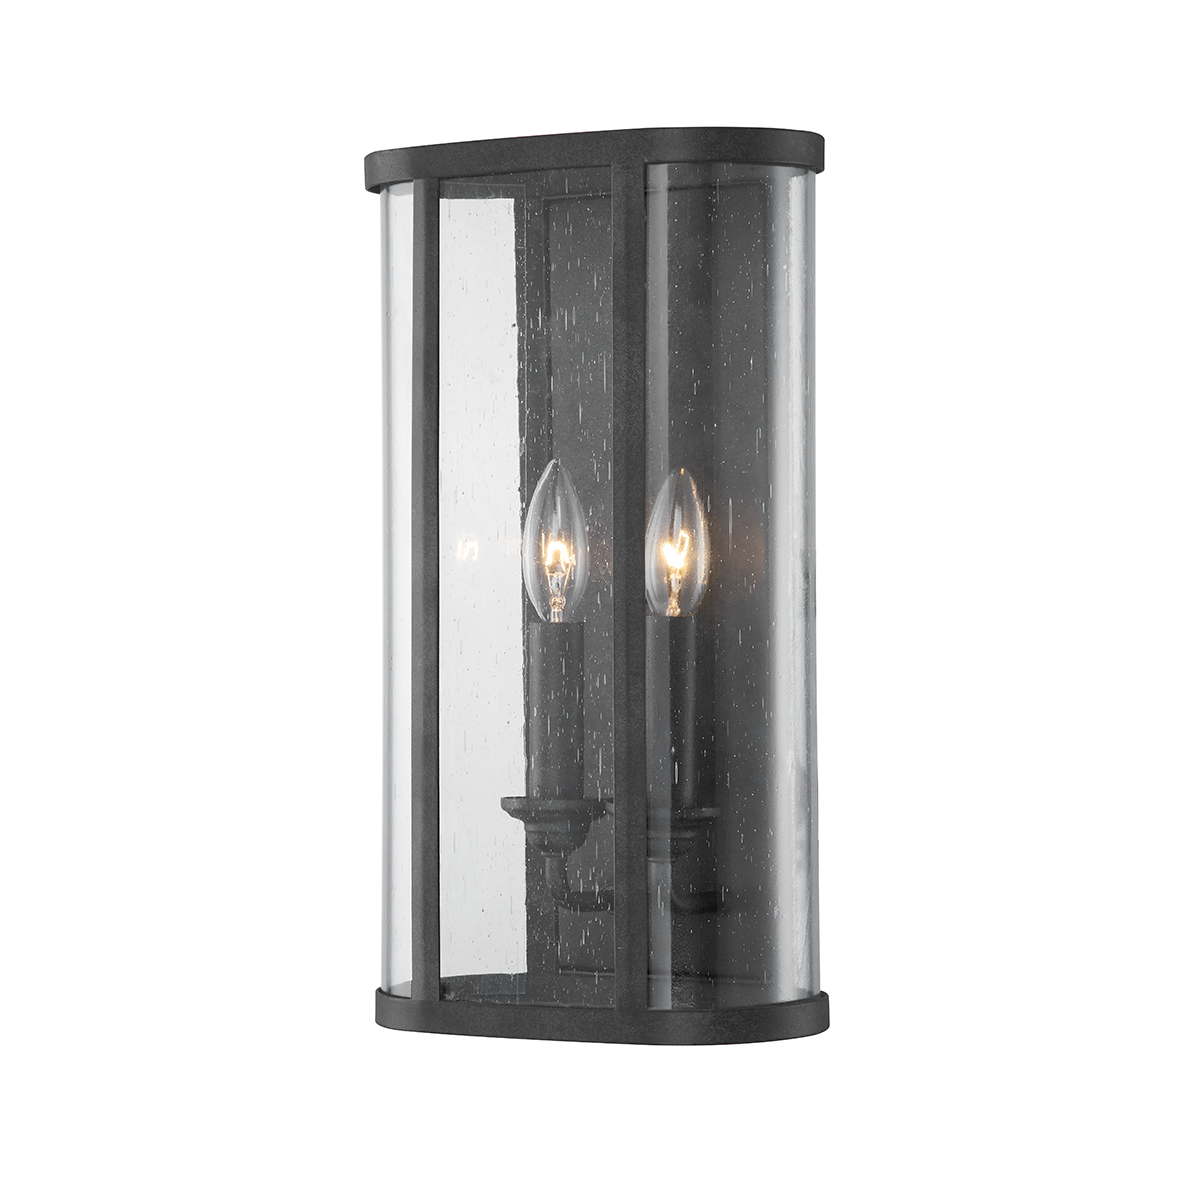 Troy Lighting 2 LIGHT MEDIUM EXTERIOR WALL SCONCE B3402 Outdoor l Wall Troy Lighting FORGED IRON  